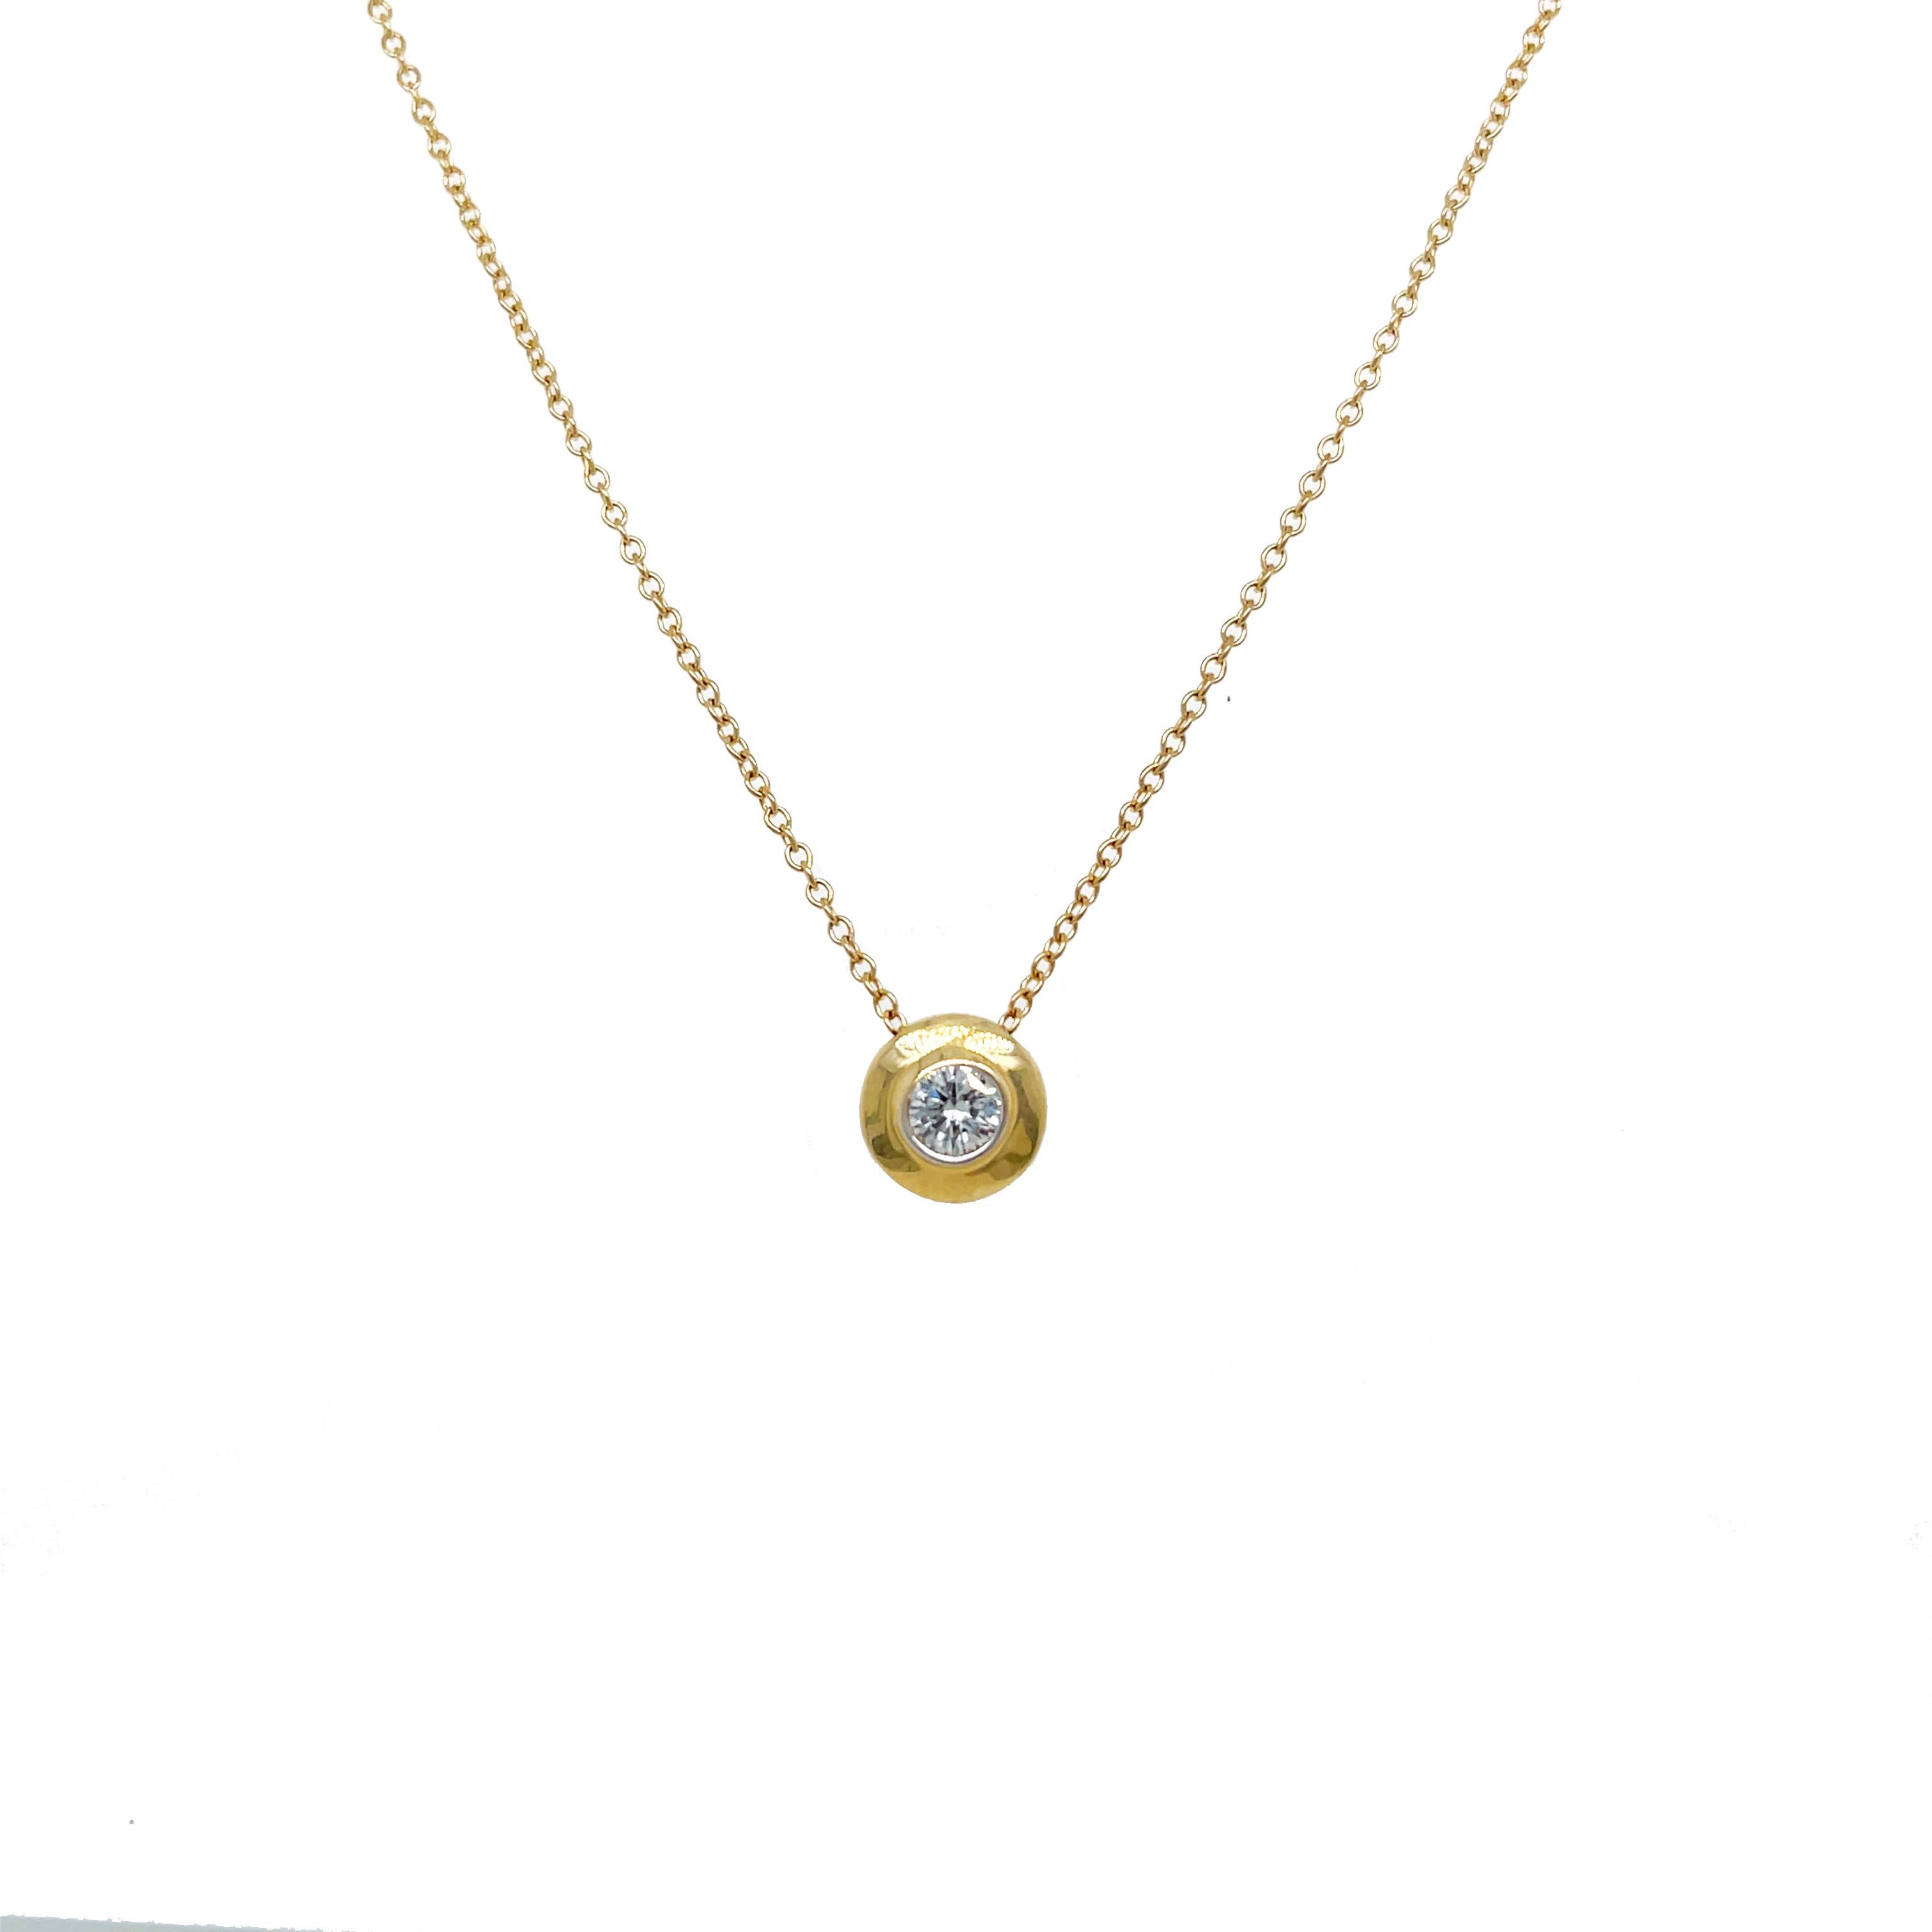 This is a lovely floating diamond set bezel necklace set in 14K yellow gold! This stunning necklace showcases a sparkling round diamond bezel set in bright yellow gold that would pair well with any outfit for any occasion! This necklace is the